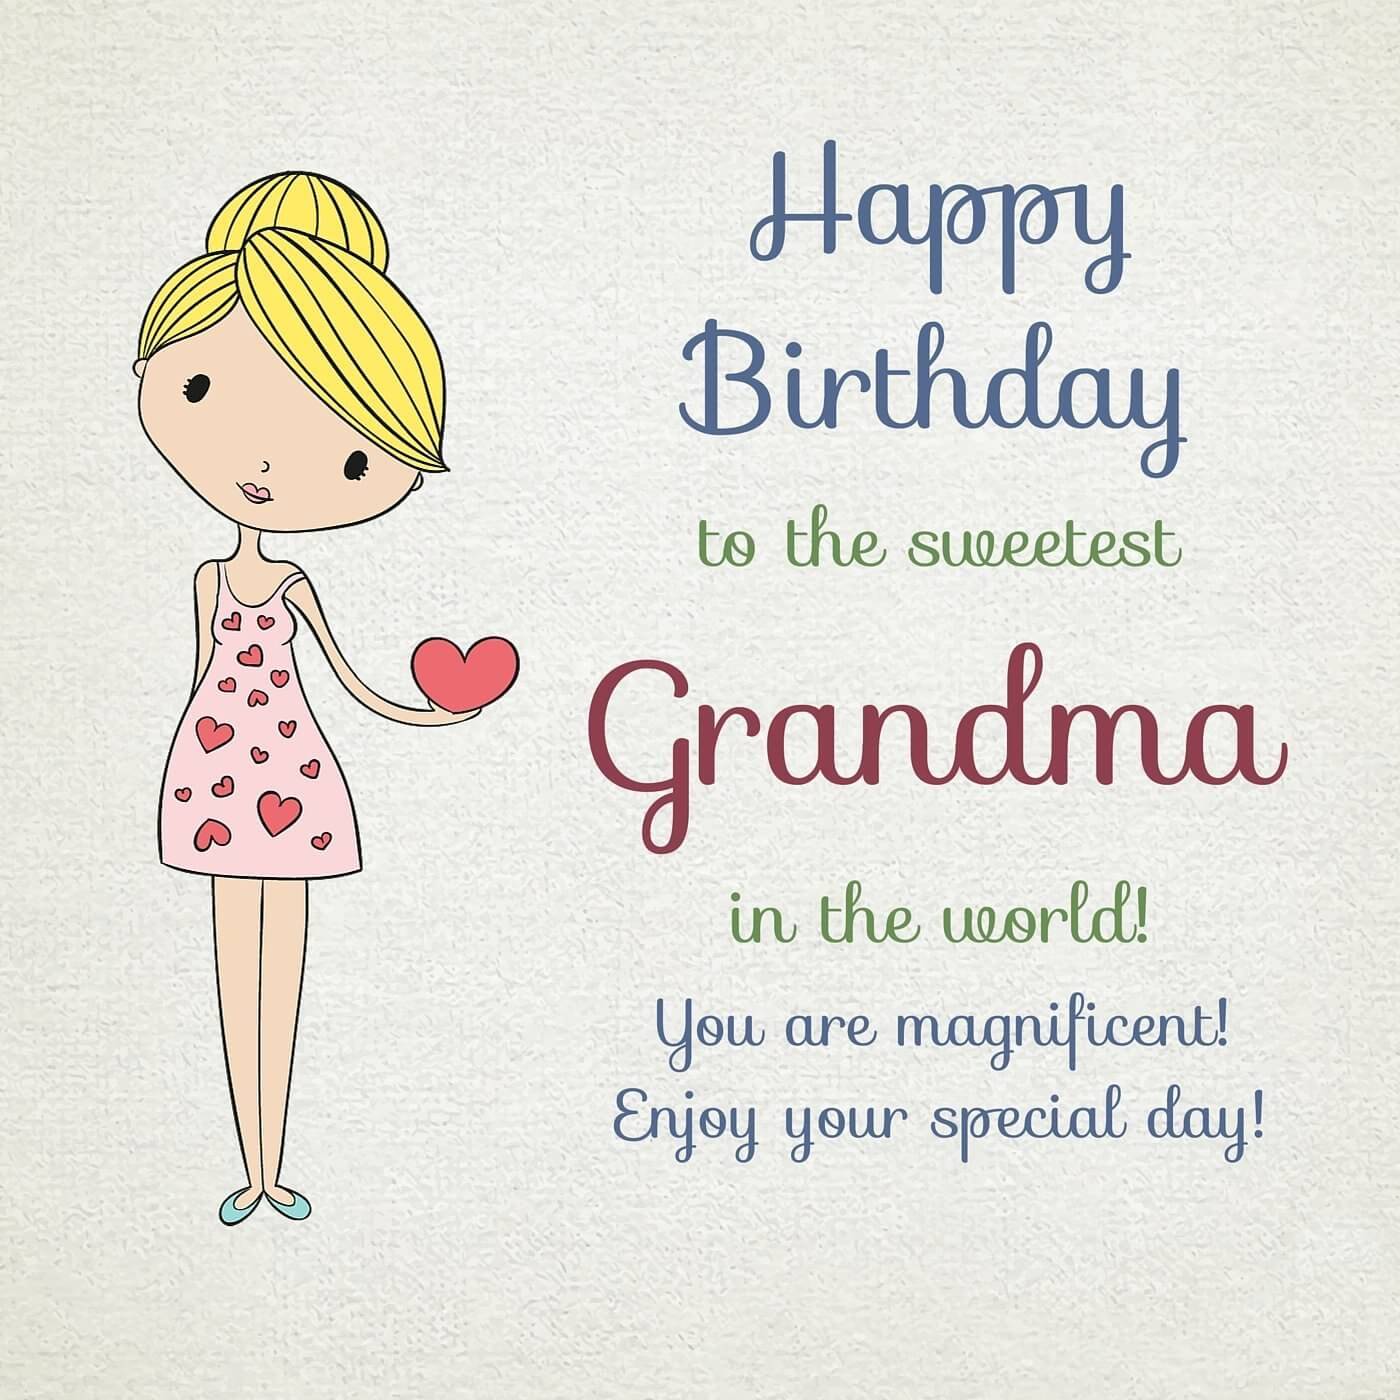 51+ Happy Birthday Wishes For Grandmother – Quotes, Cake Images, Messages, Greeting Cards.